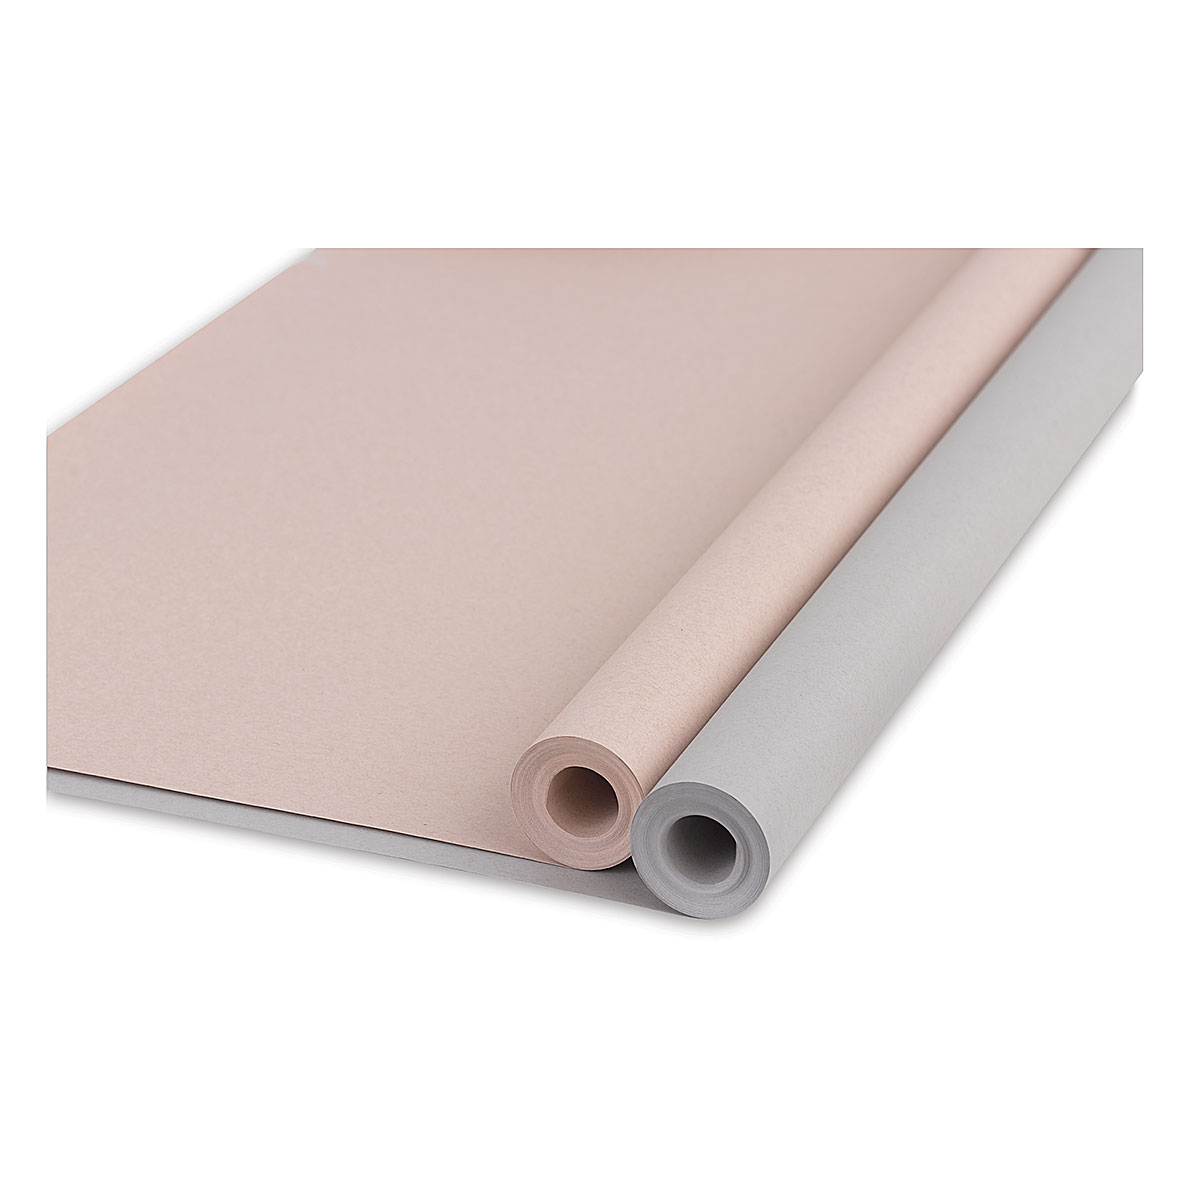 Strathmore 400 Series Recycled Toned Sketch Paper - Tan, 19x24  (25-Sheets)